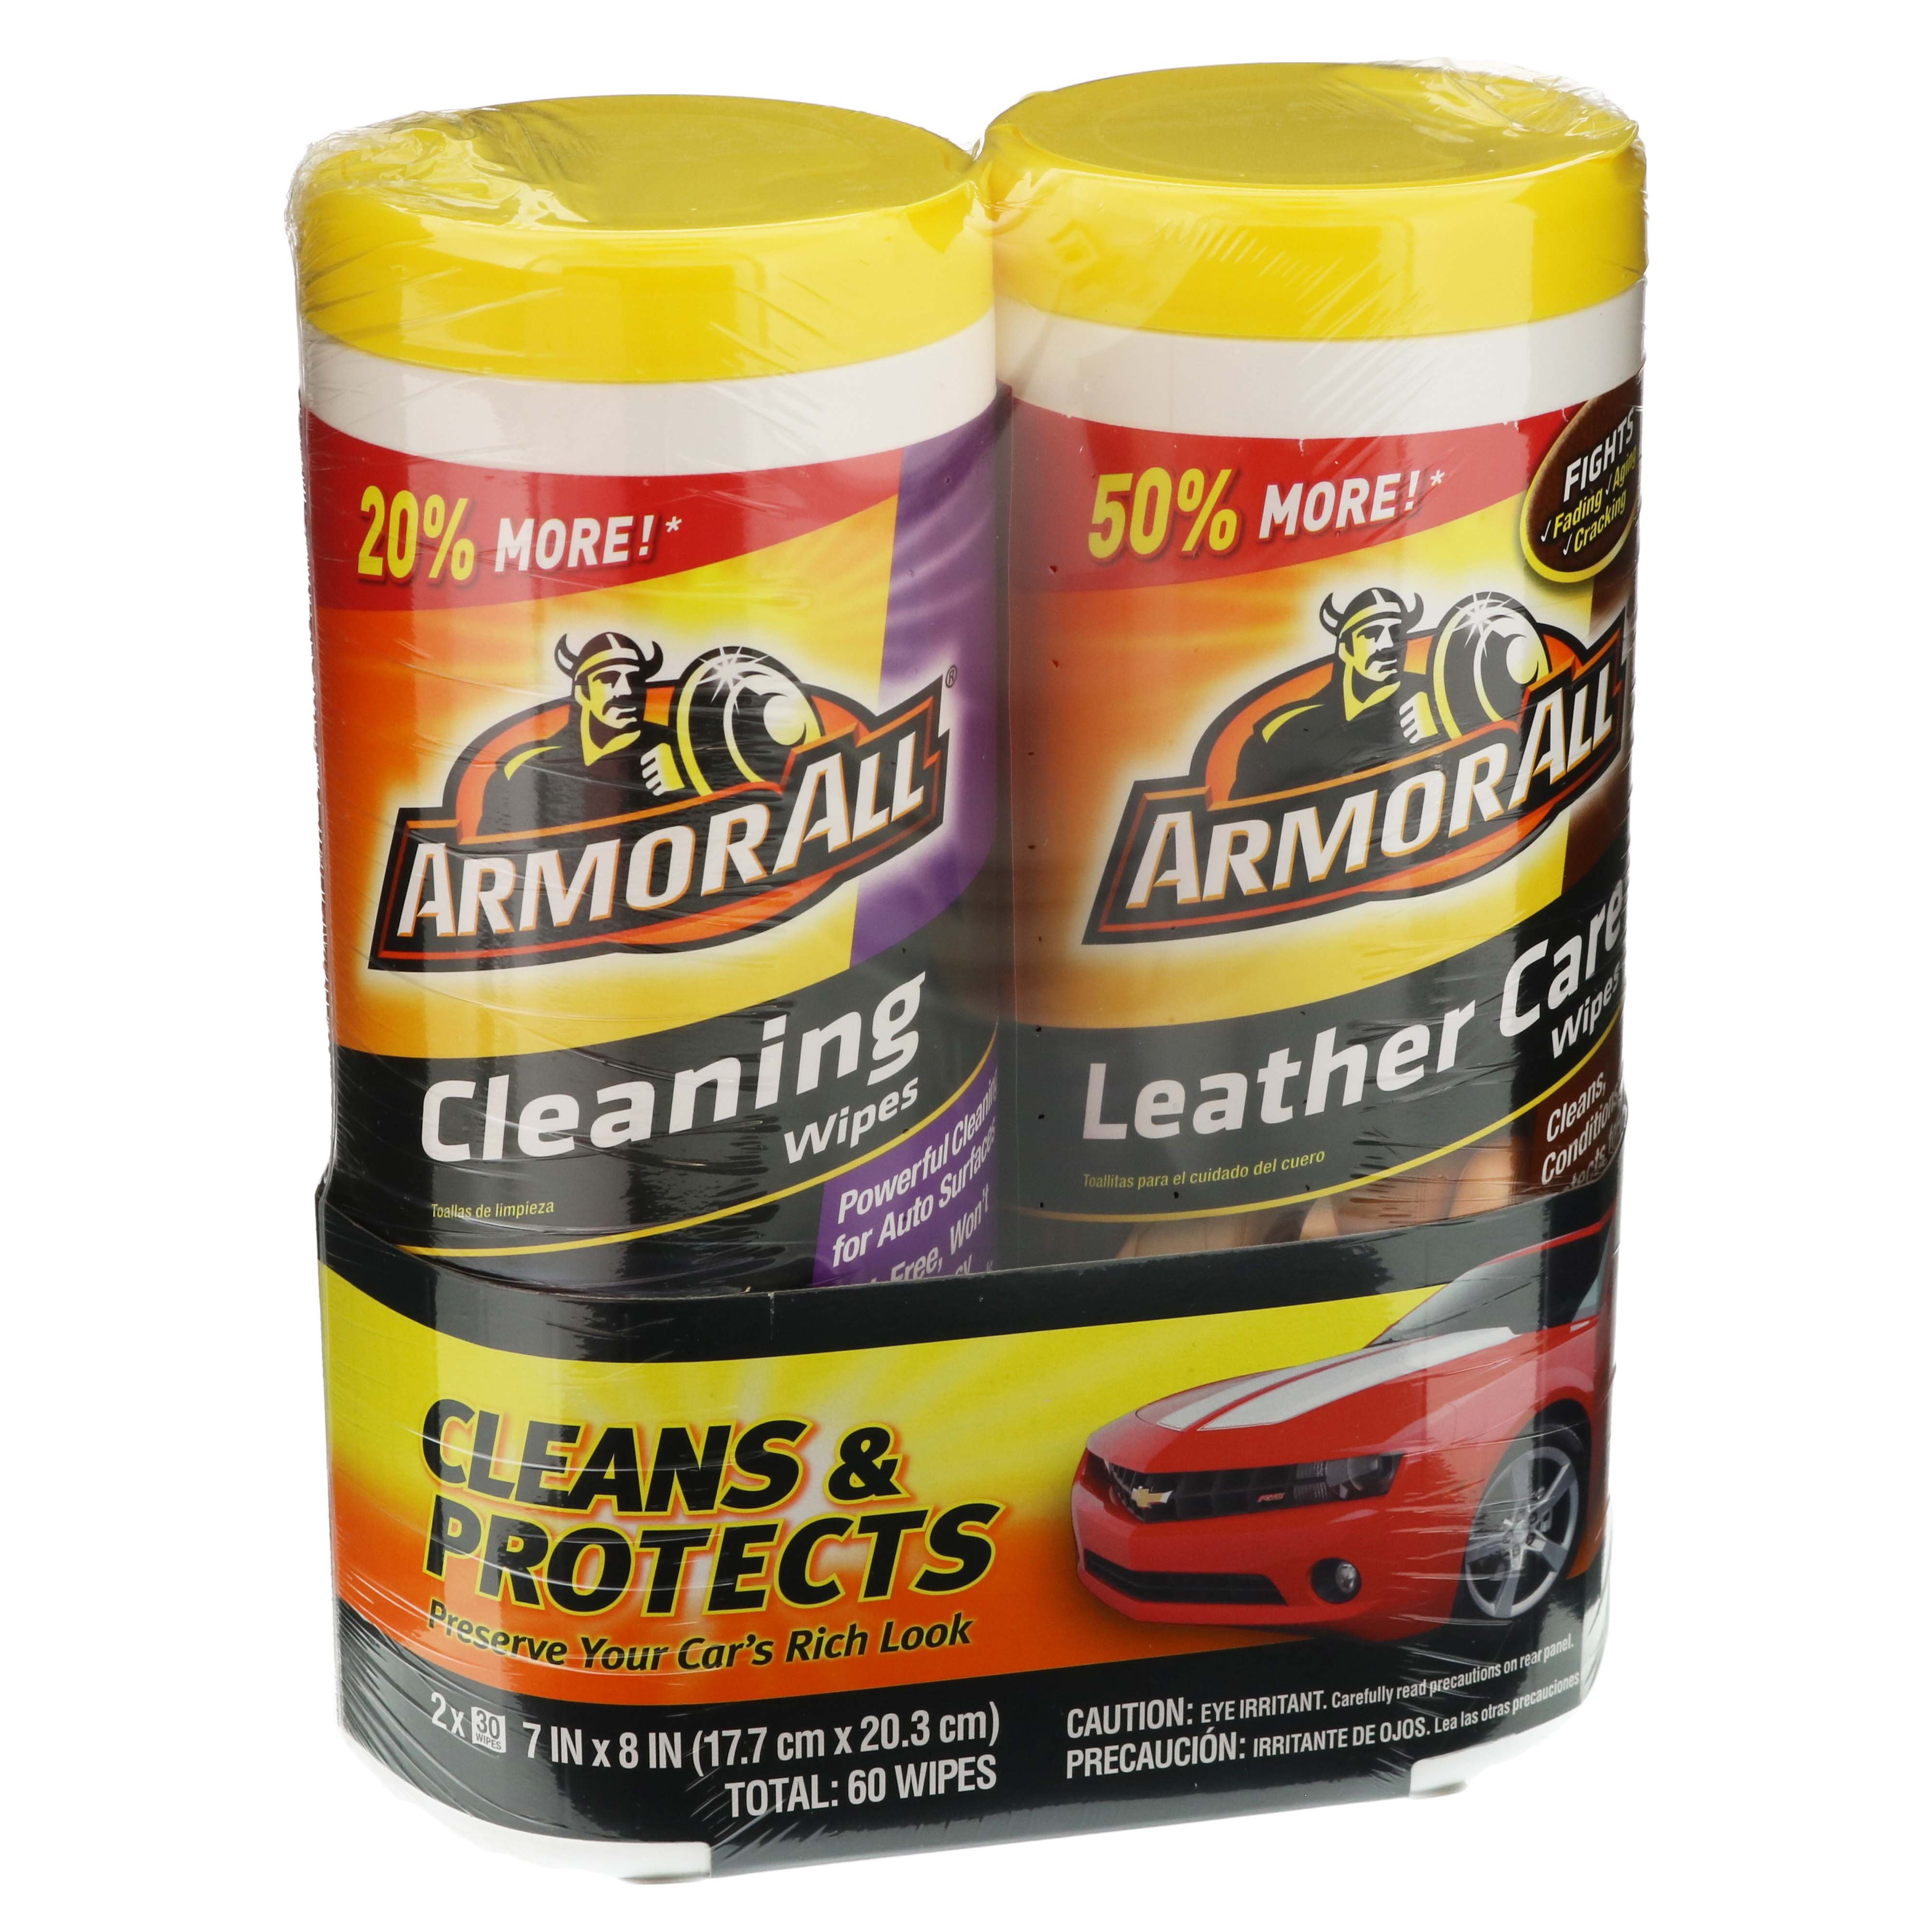 Armor All Leather Care Wipes